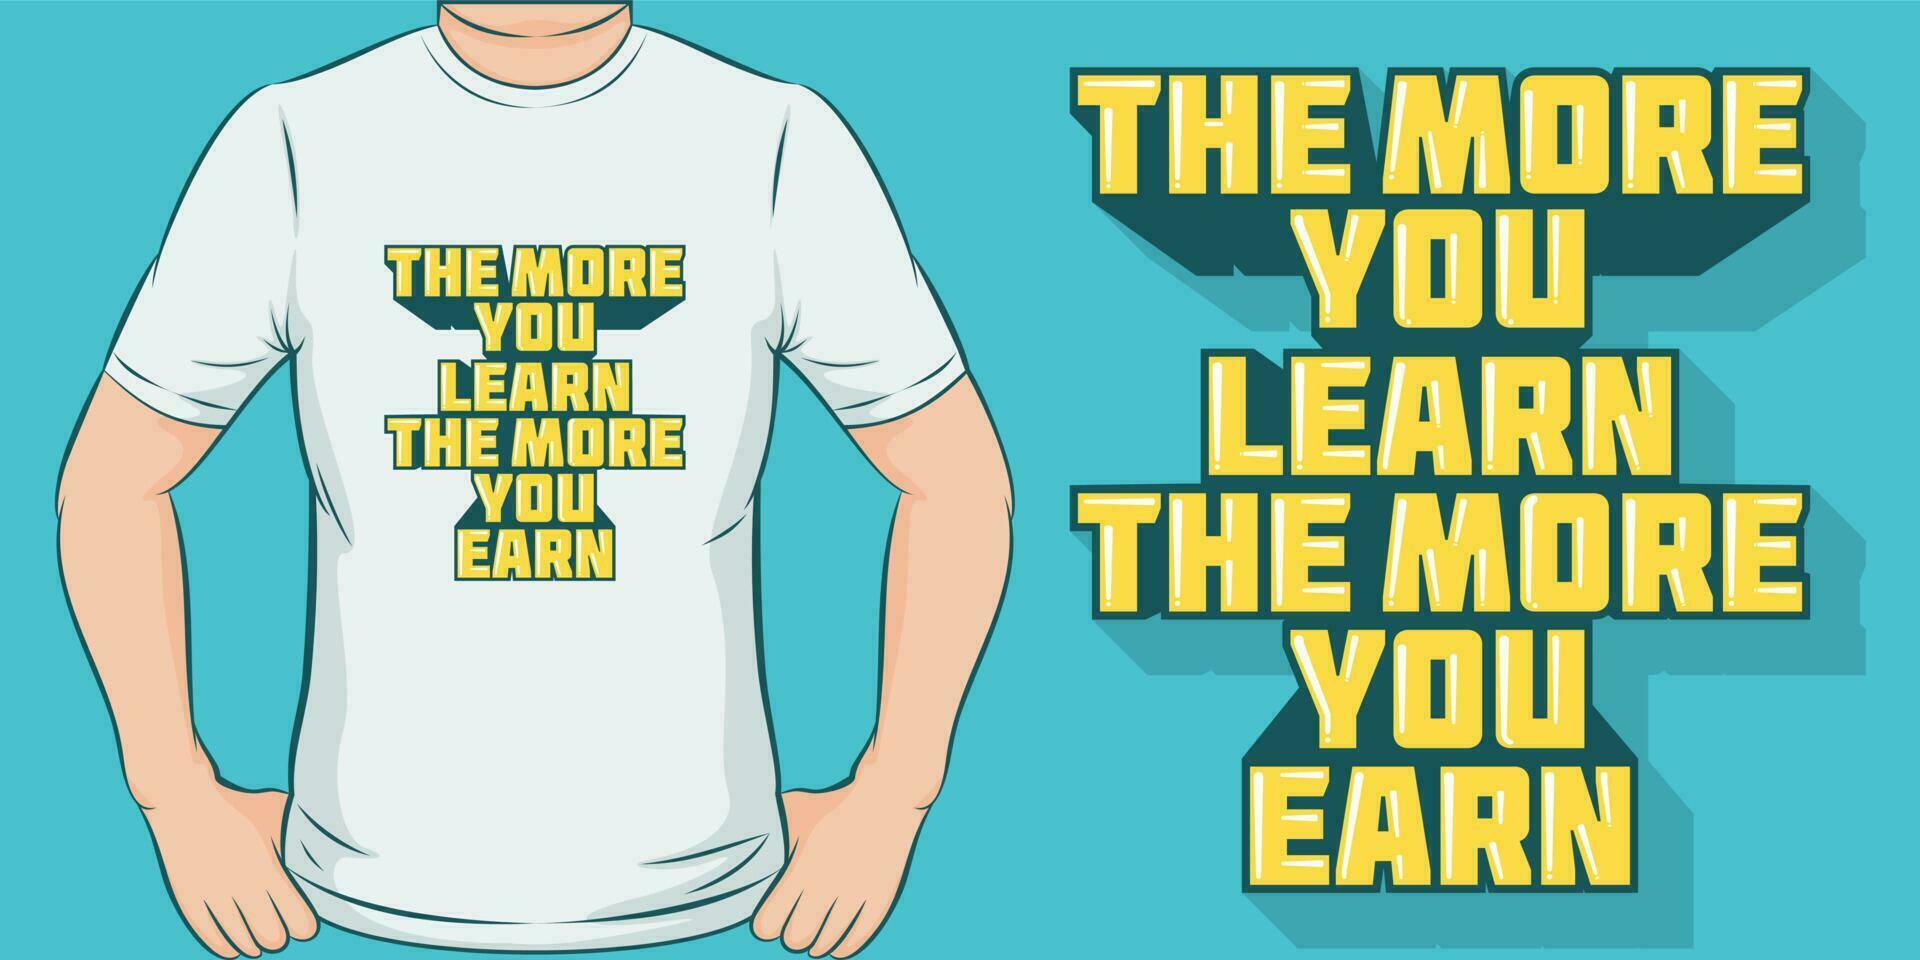 The More You Learn, The More You Earn, Motivational Quote T-Shirt Design. vector